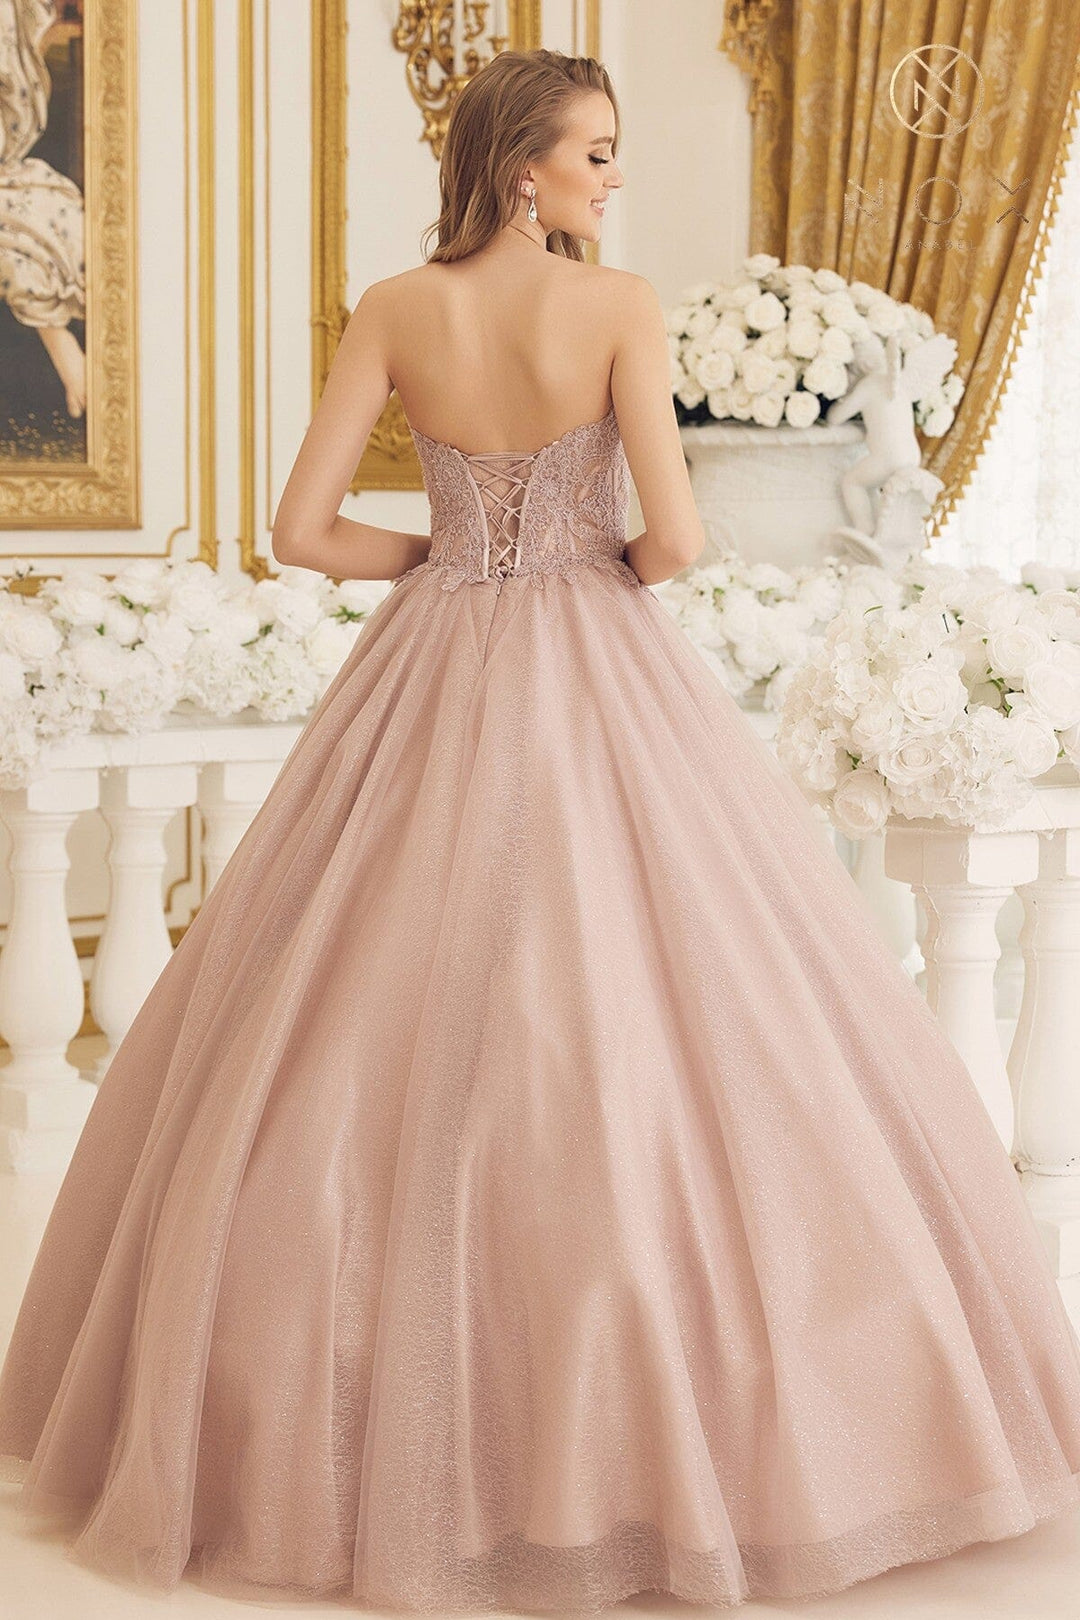 Applique Strapless Ball Gown by Nox Anabel CU1102